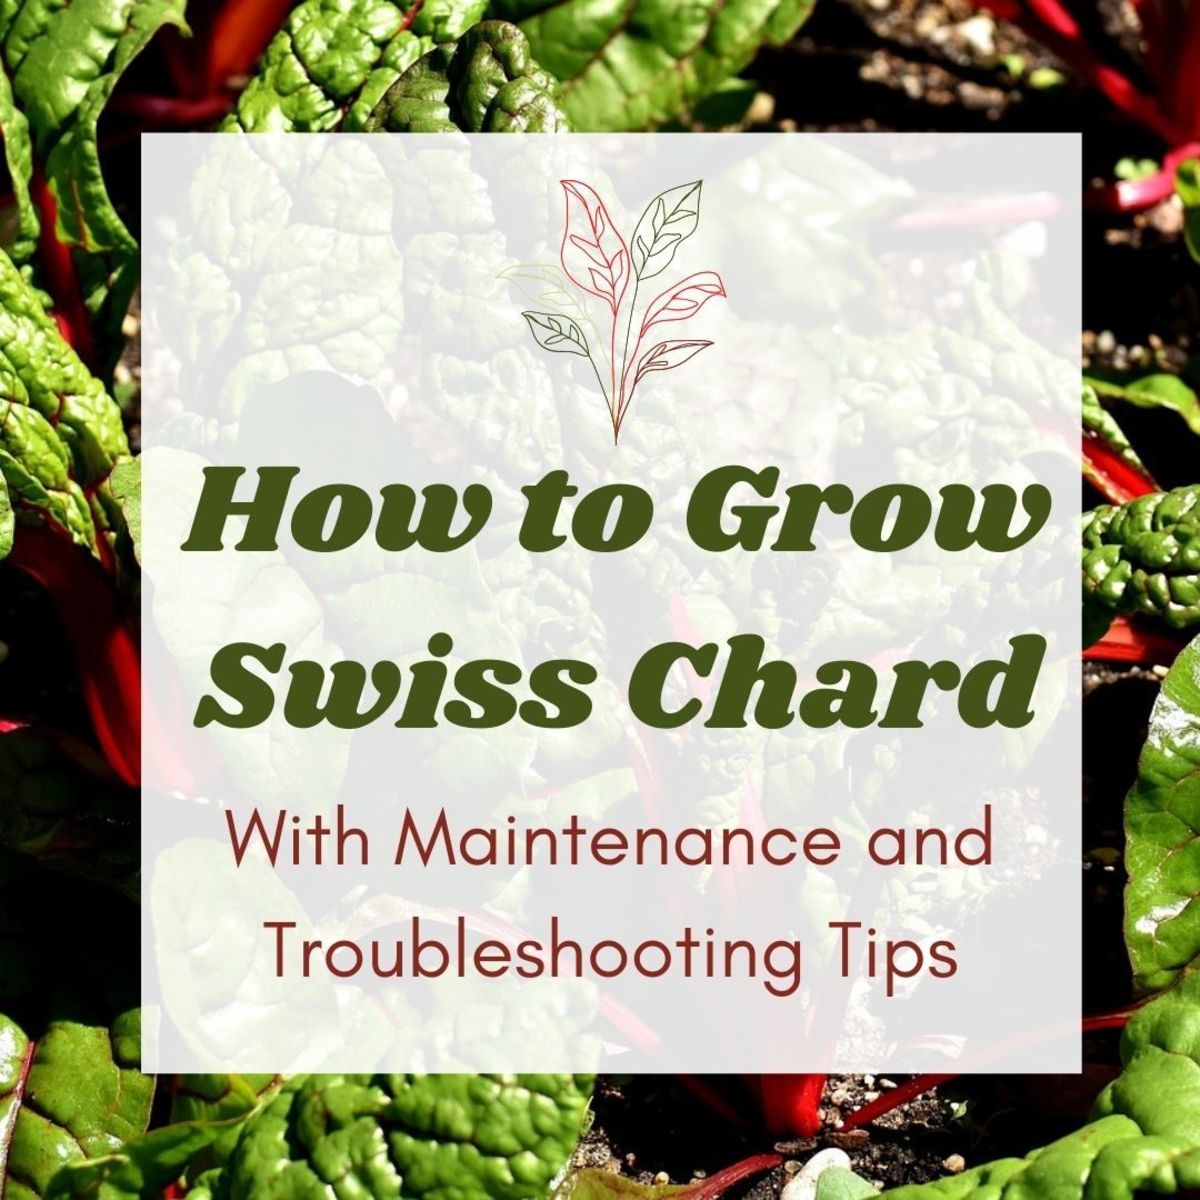 Swiss chard is easy to grow and chock-full of vitamins and nutrients.